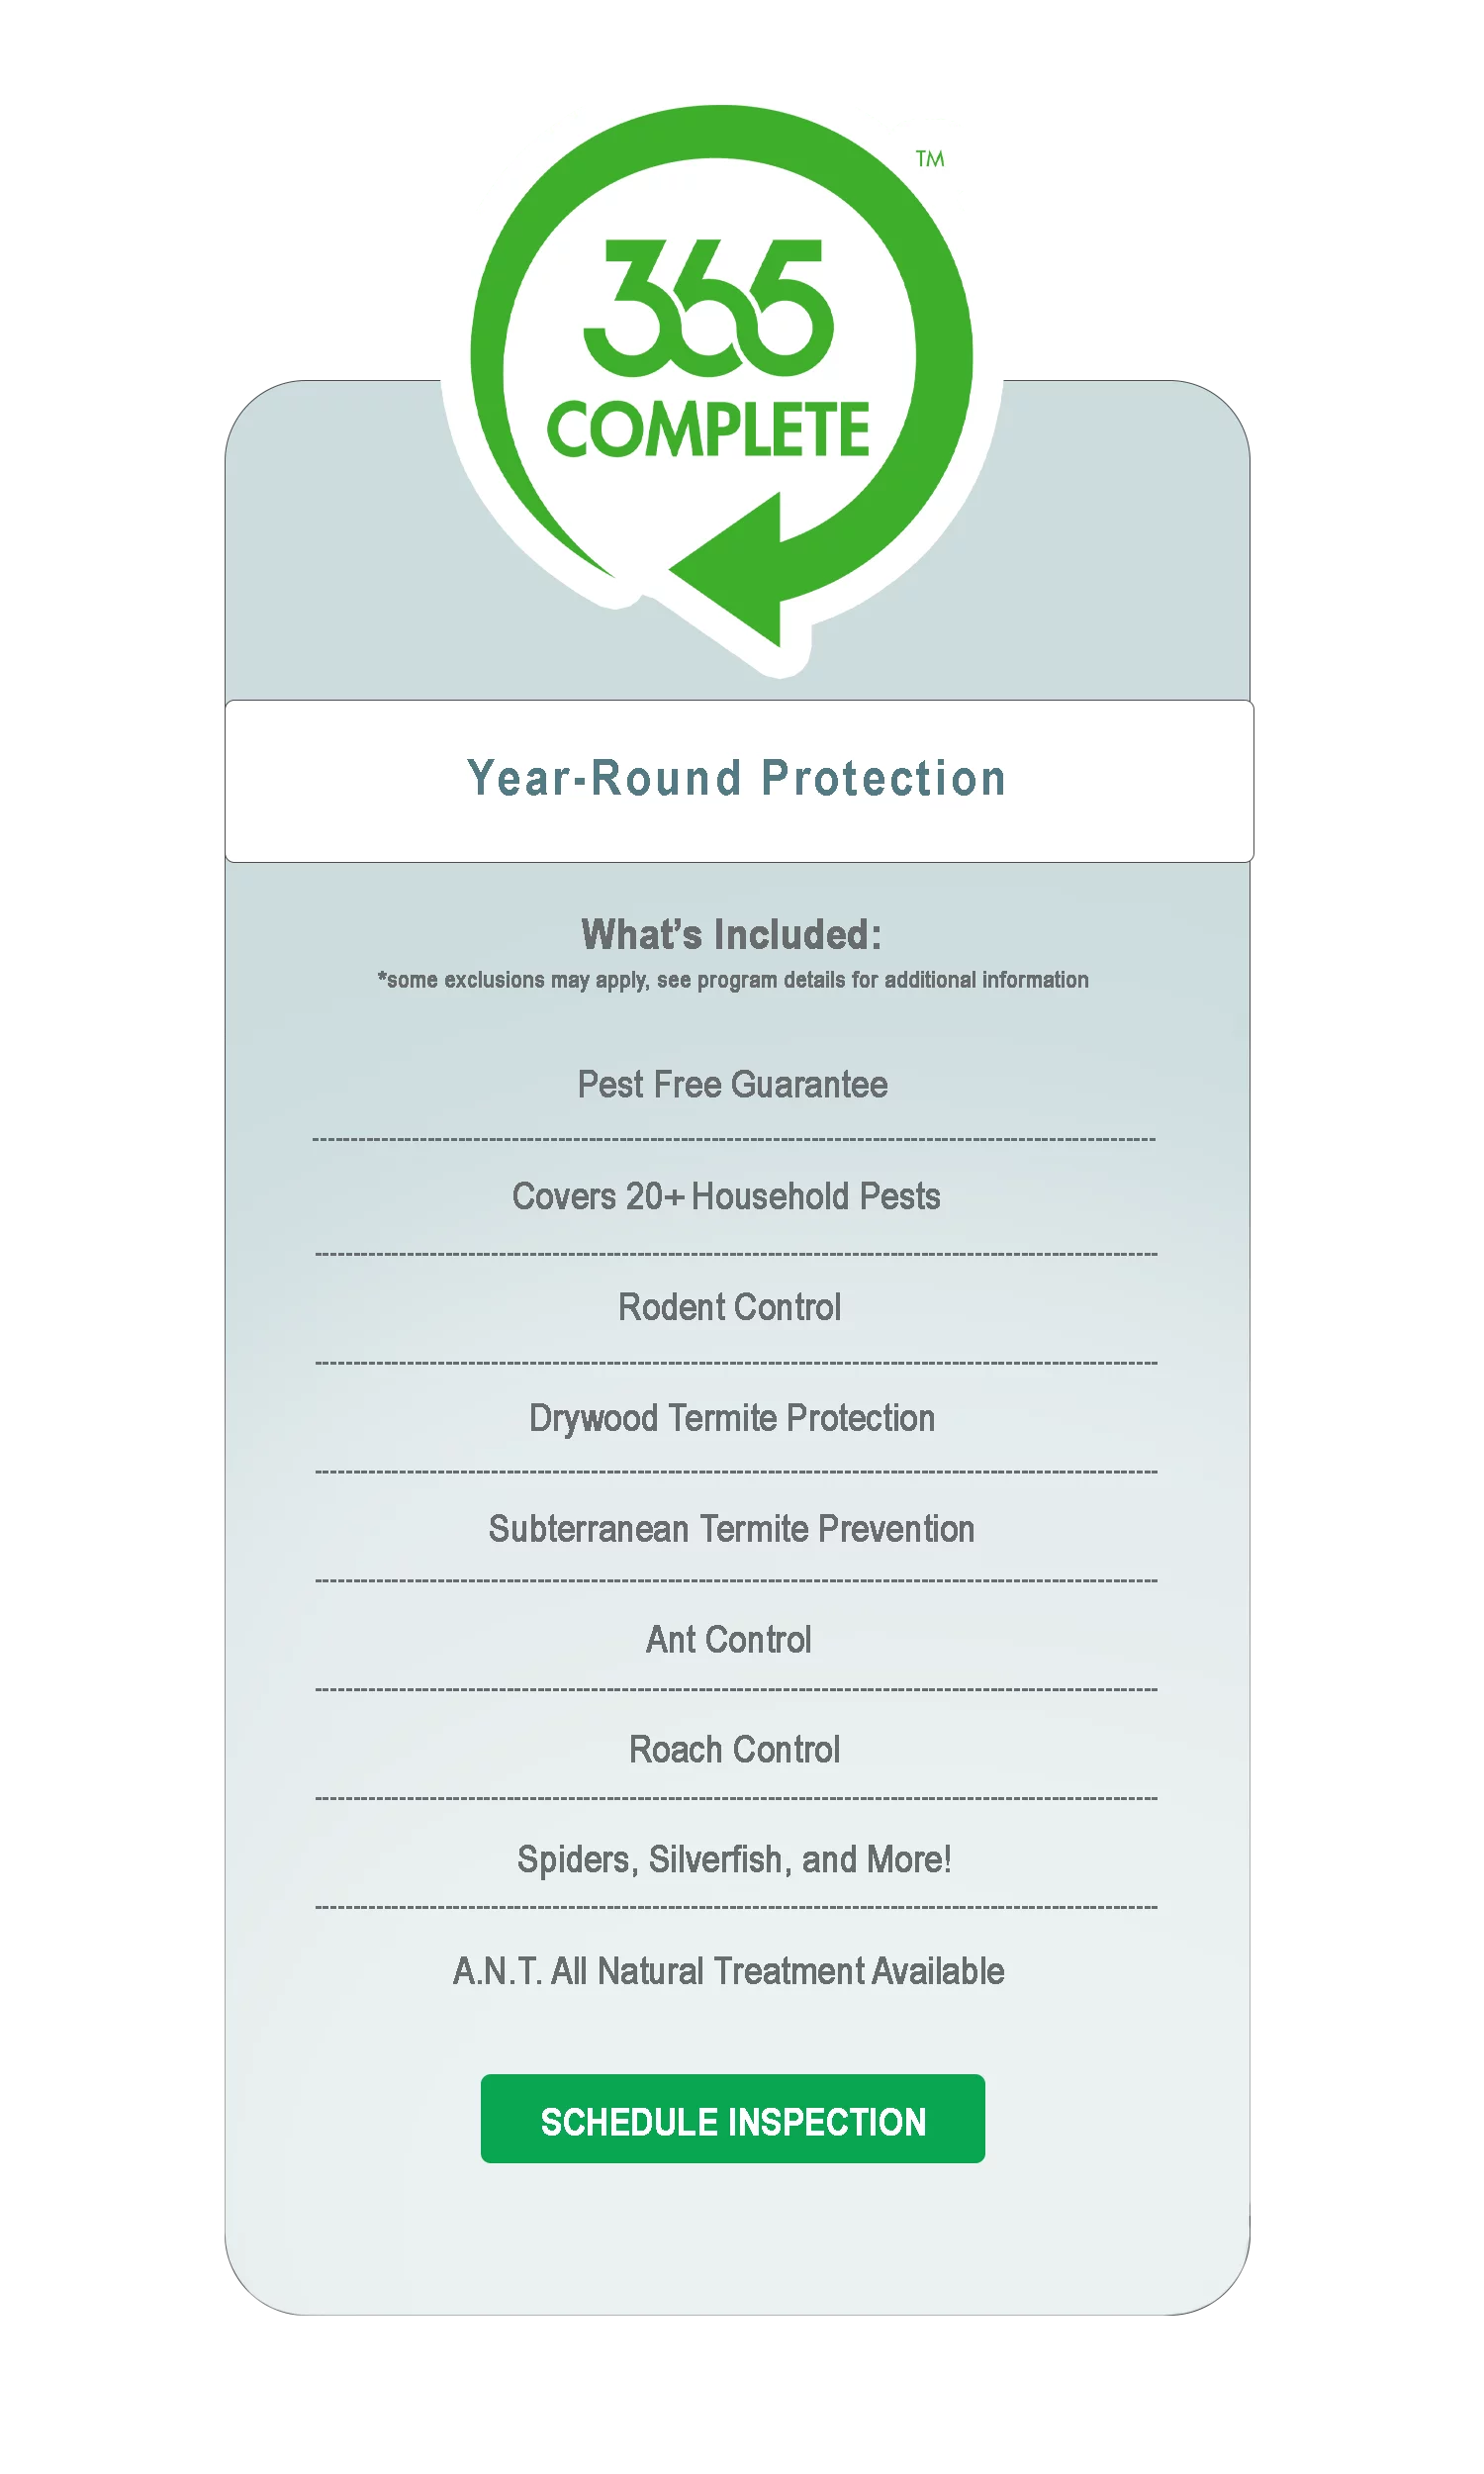 updated 365 complete year round protection graphic recreation